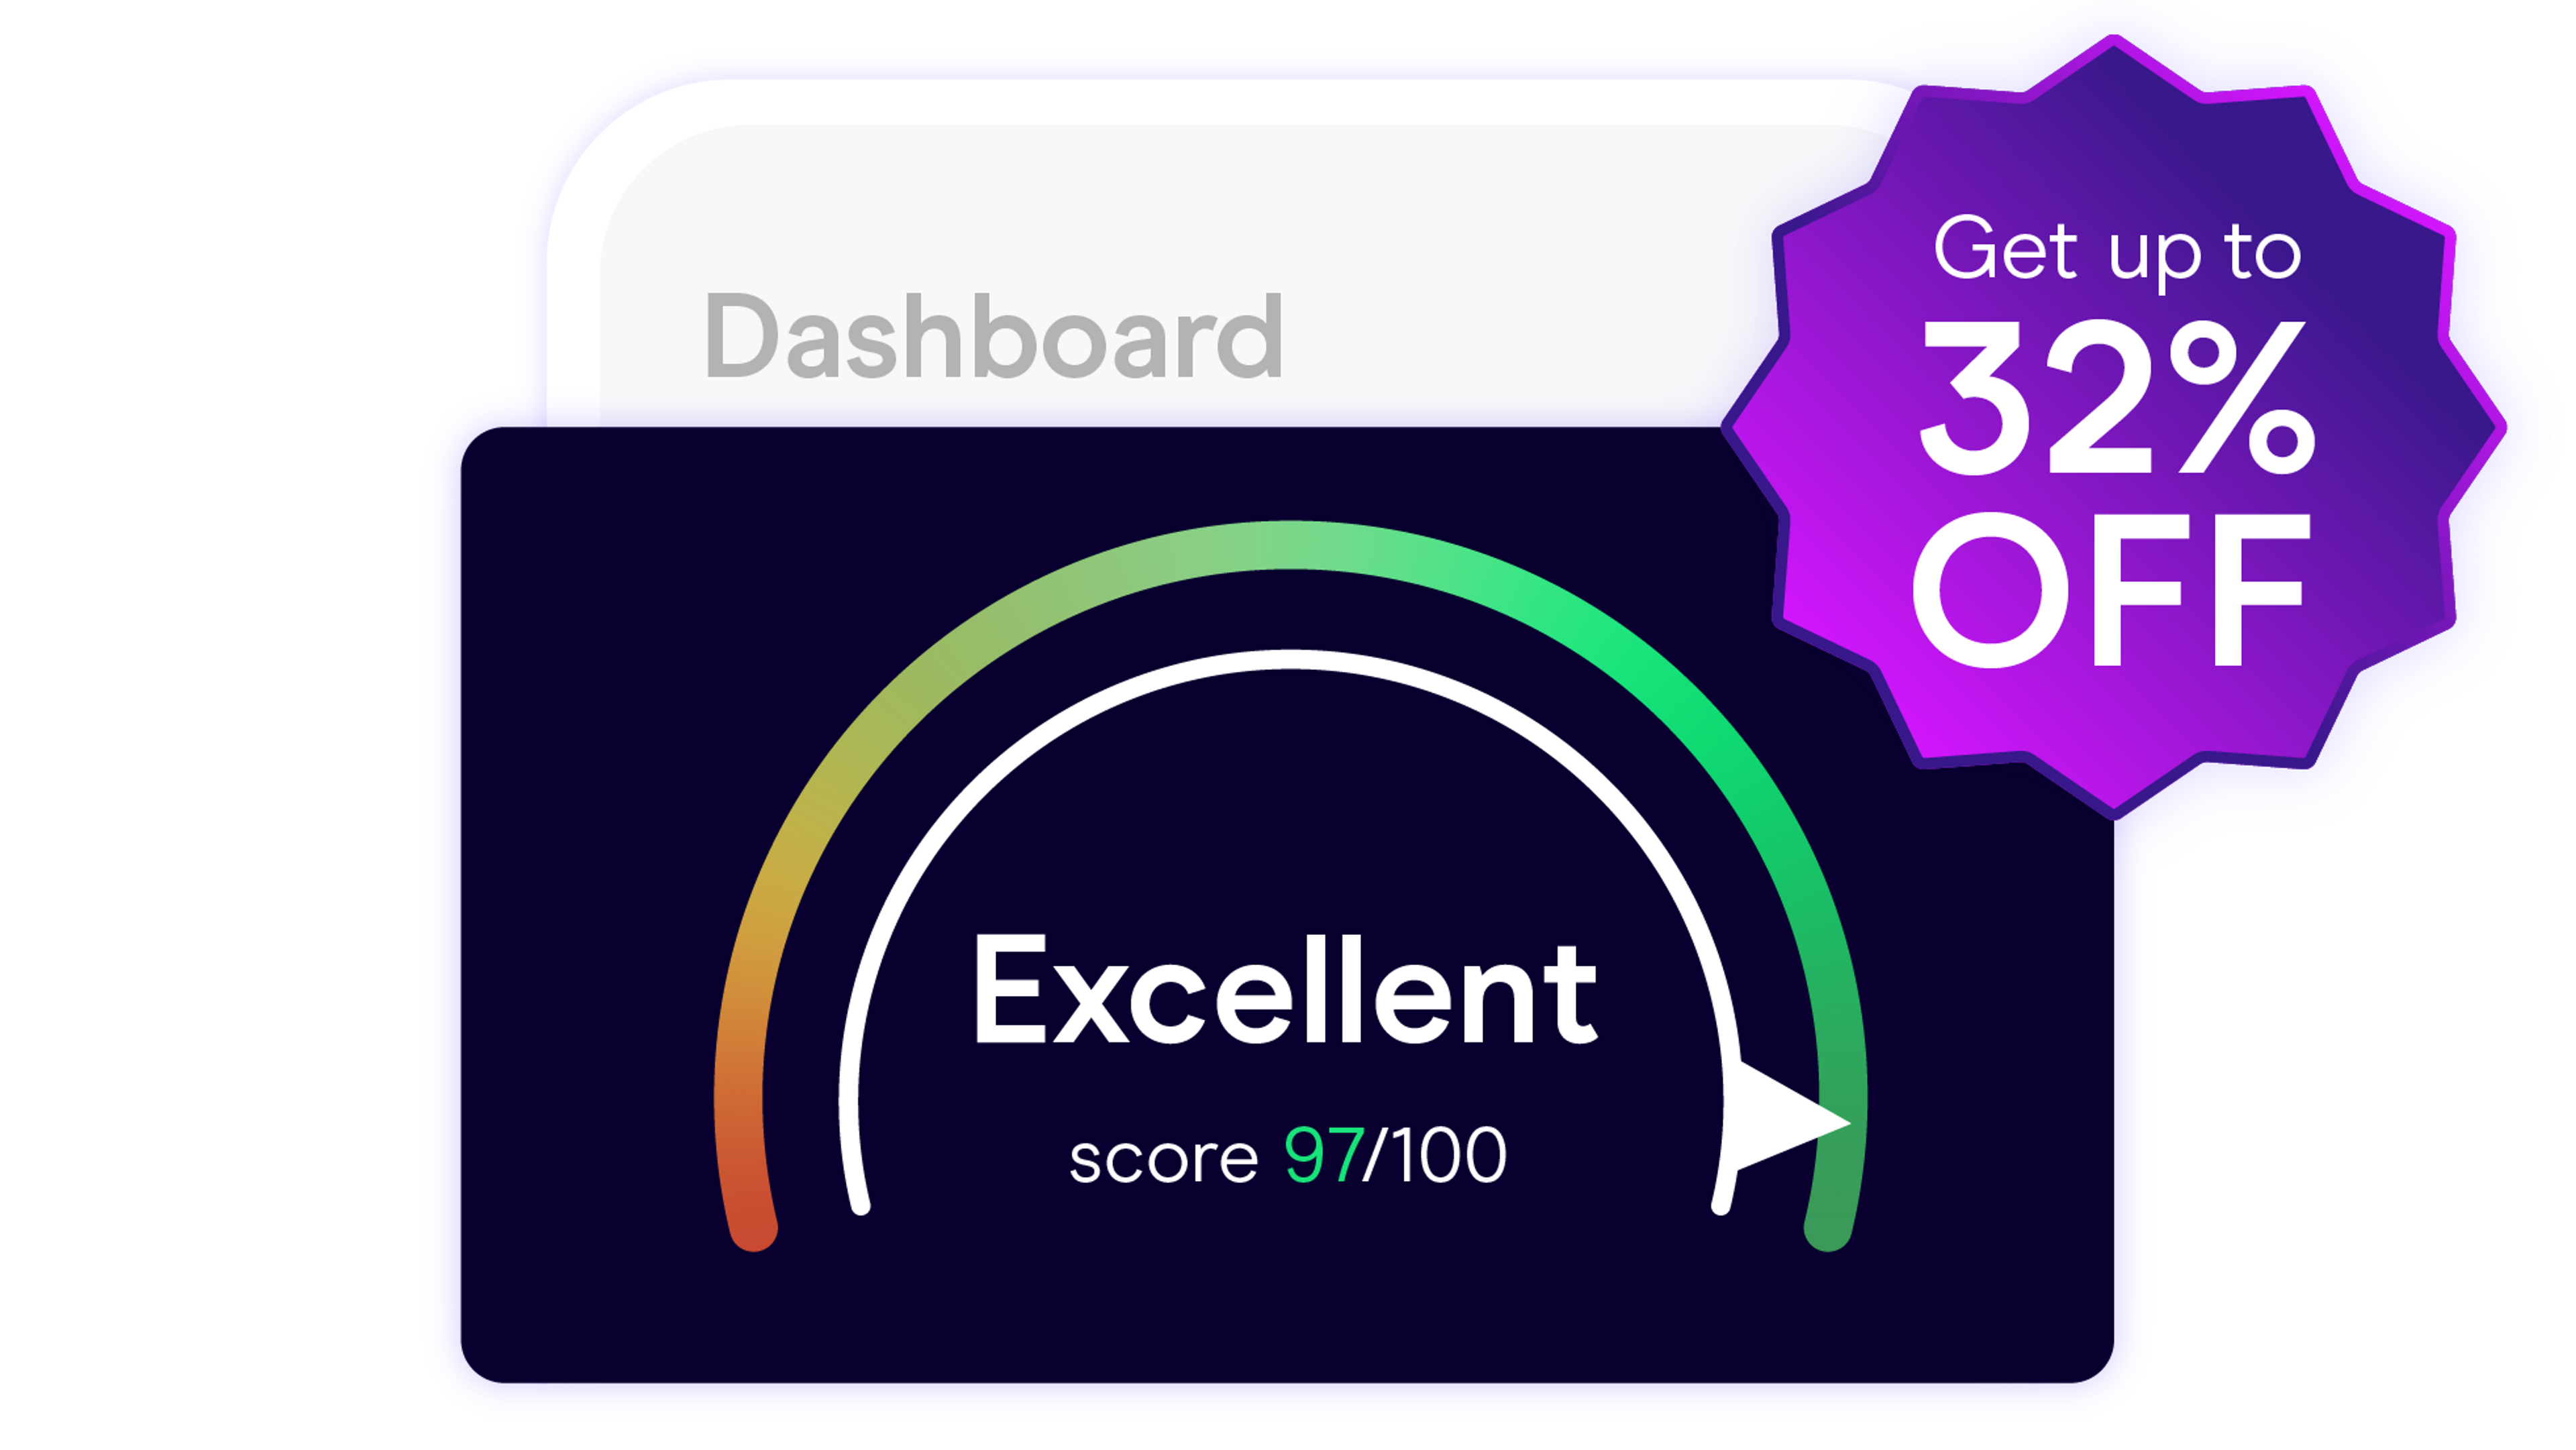 zego insurance driving score app and savings